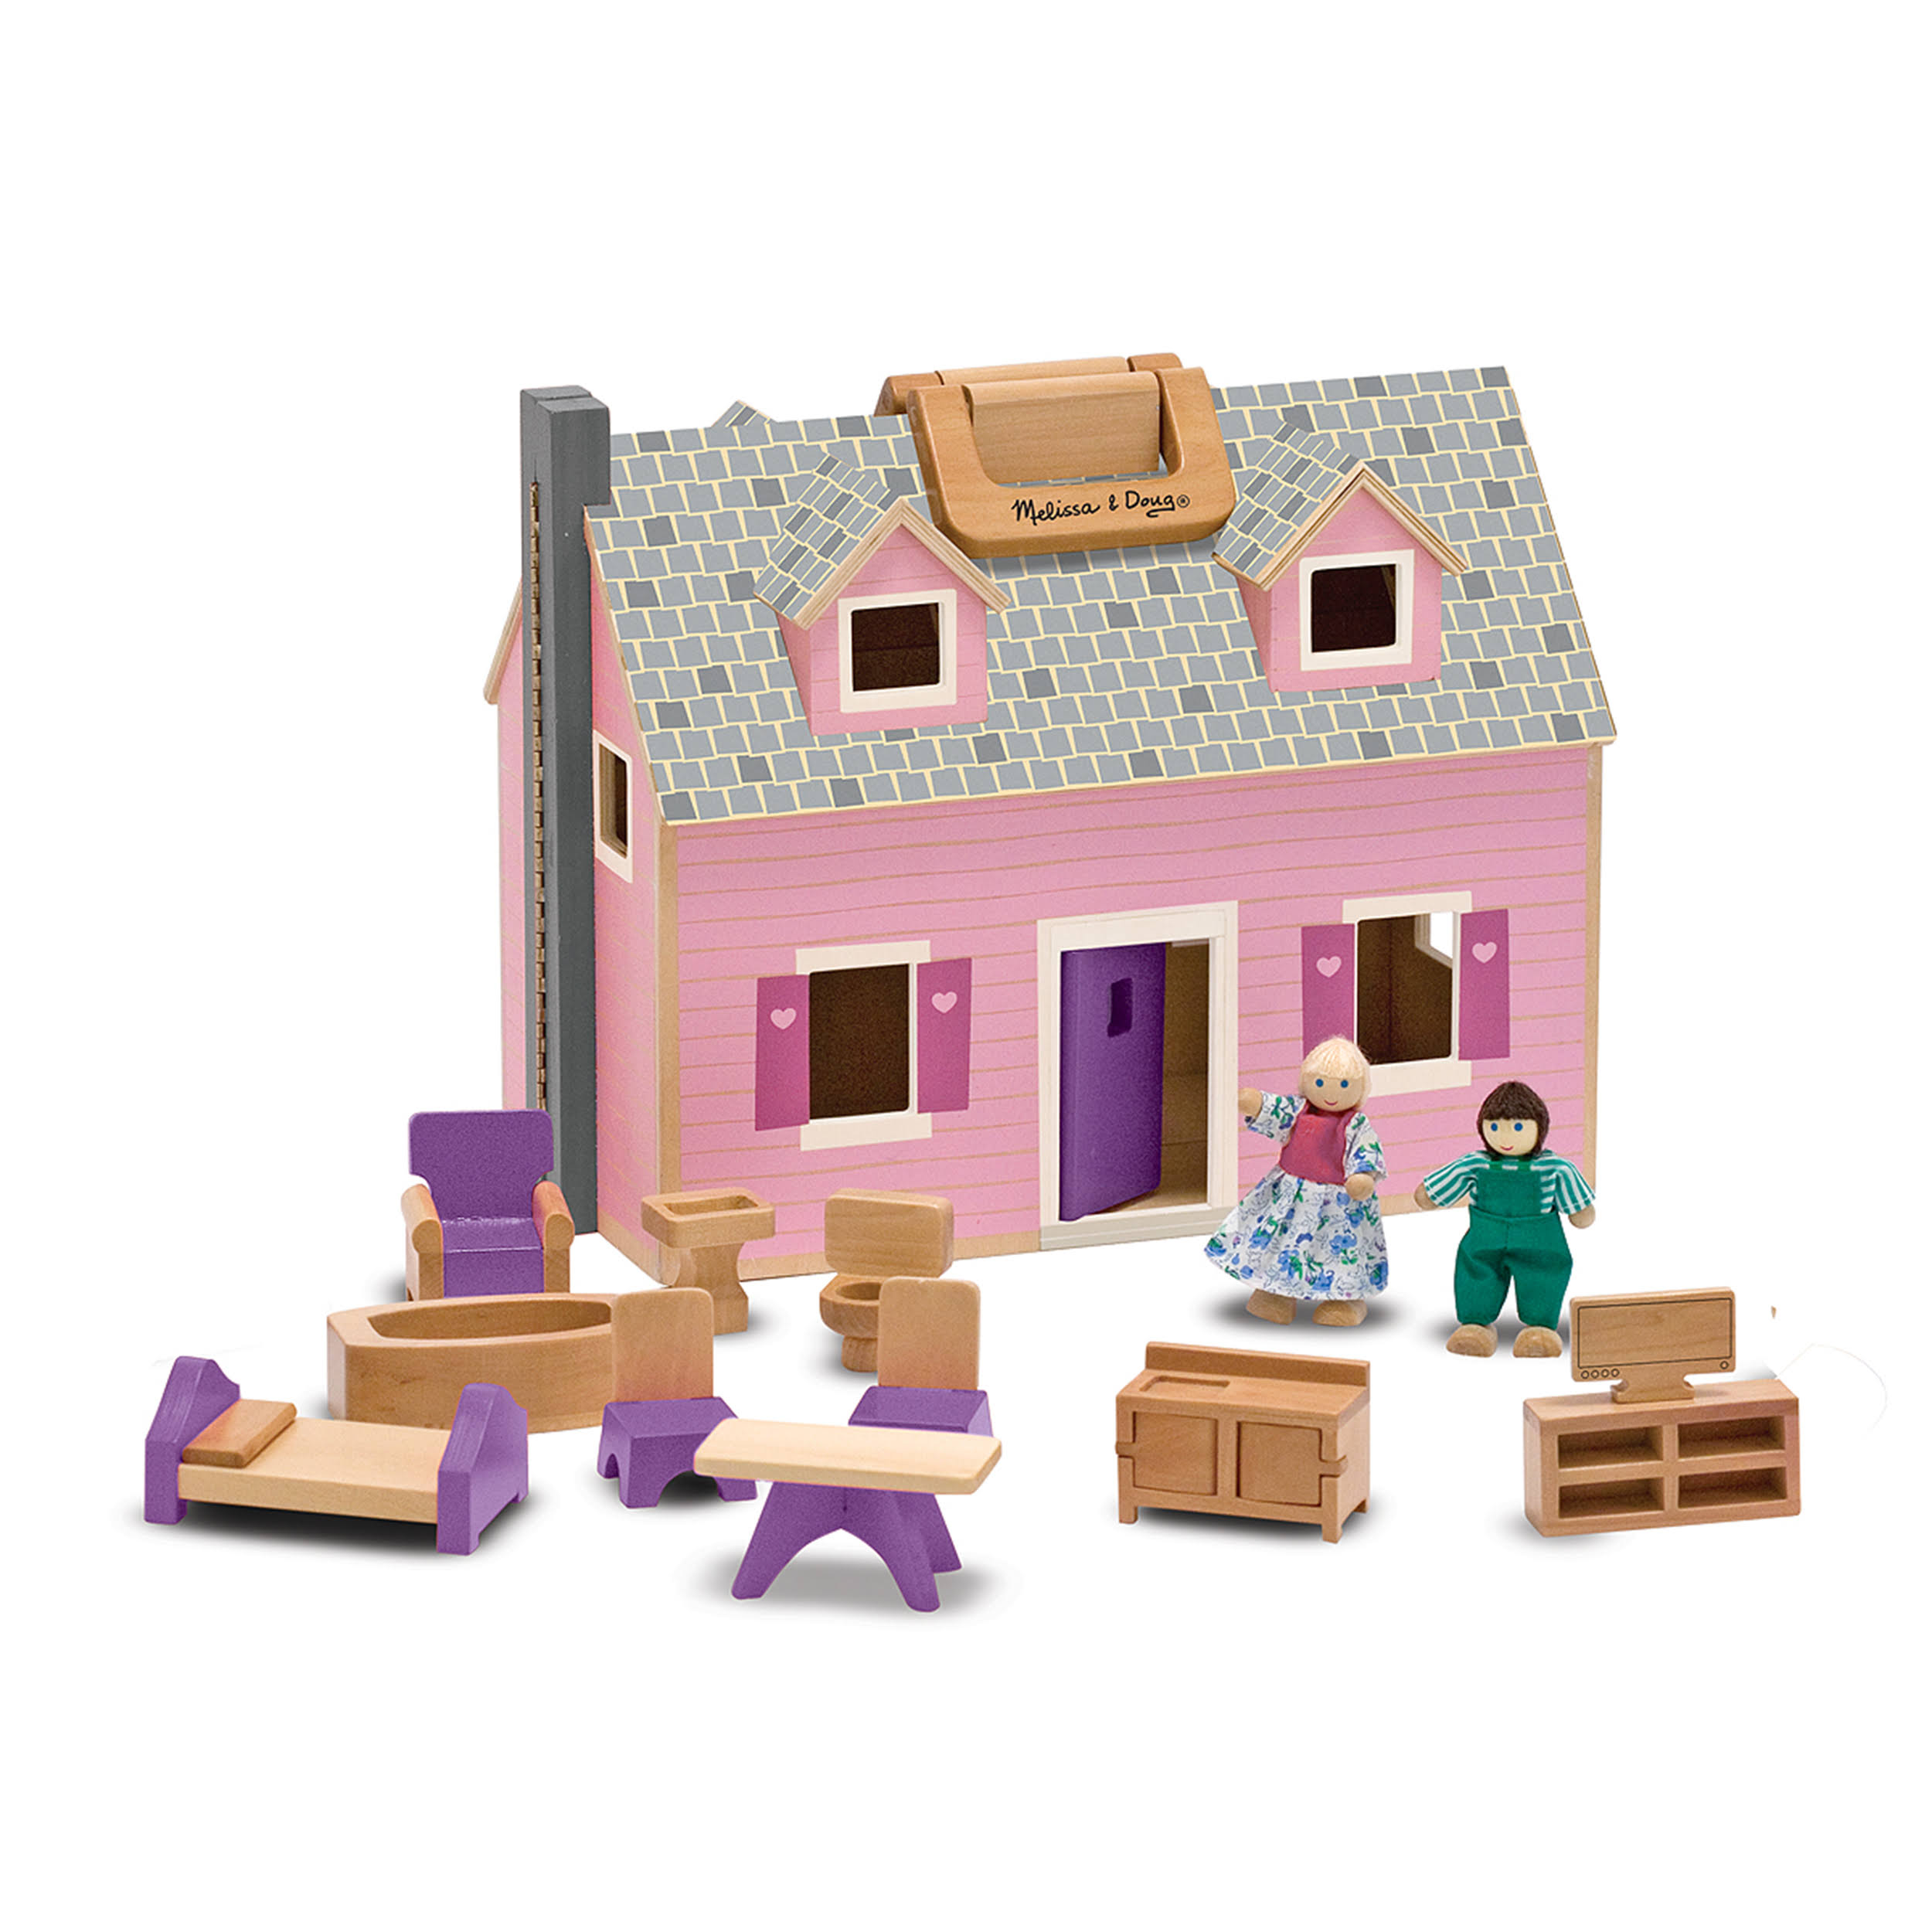 Melissa and Doug Fold and Go Wooden Doll House Play Set - Pink